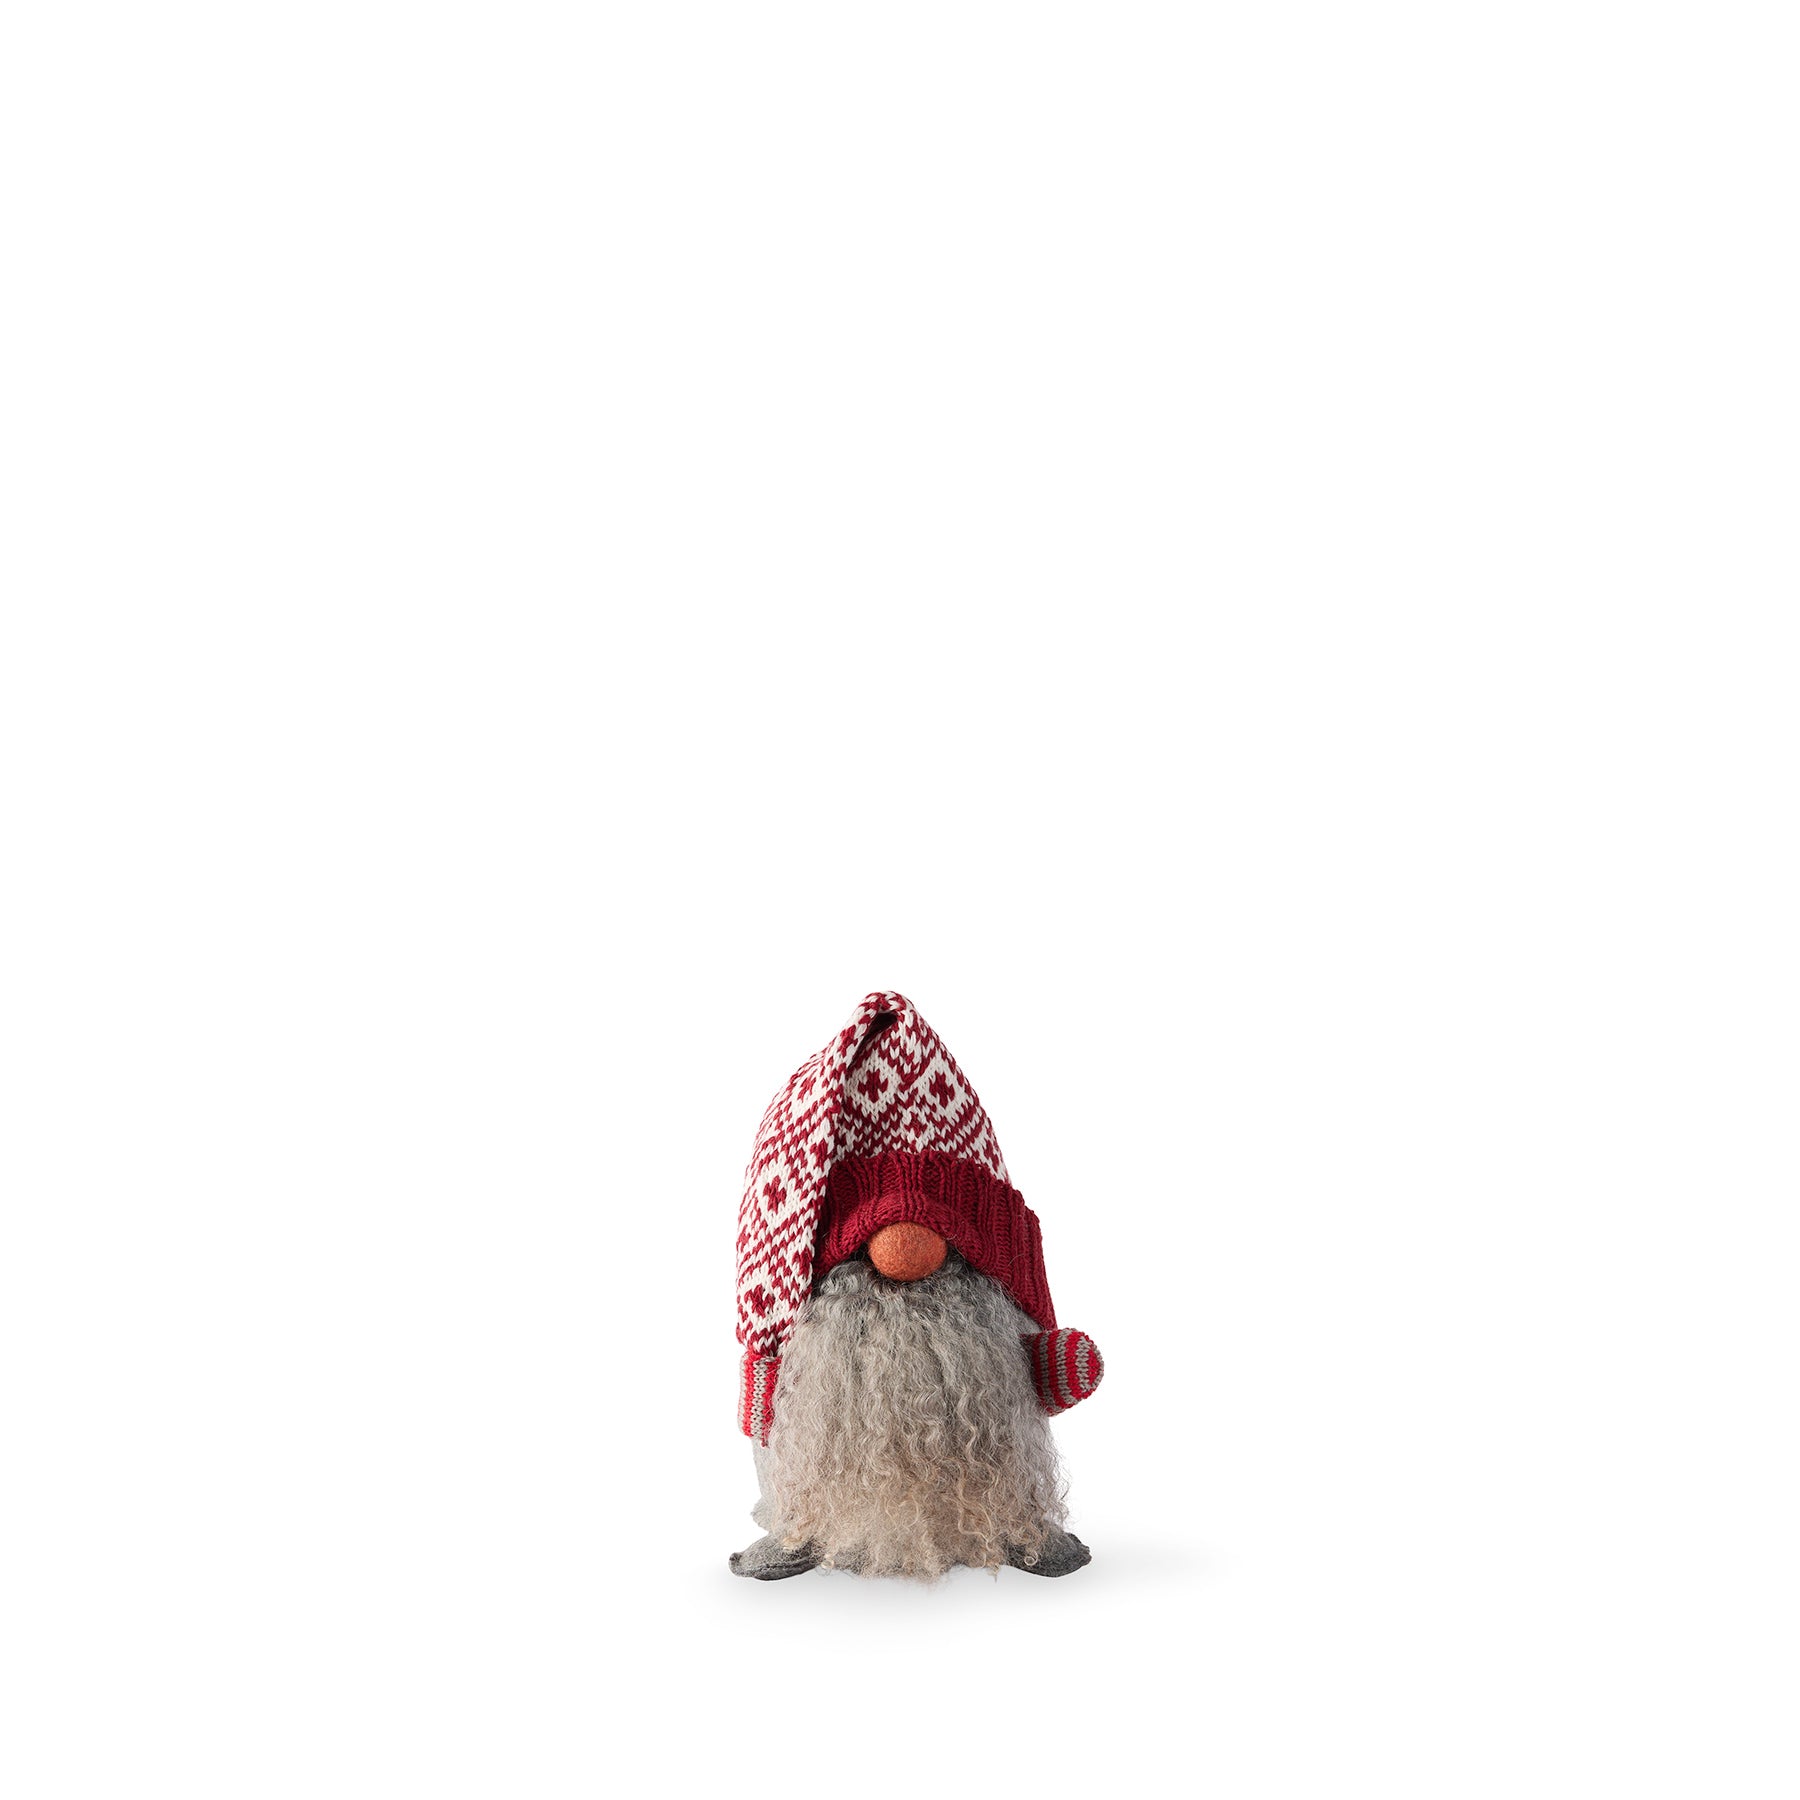 Lill-Claes with Red Knitted Cap Zoom Image 1